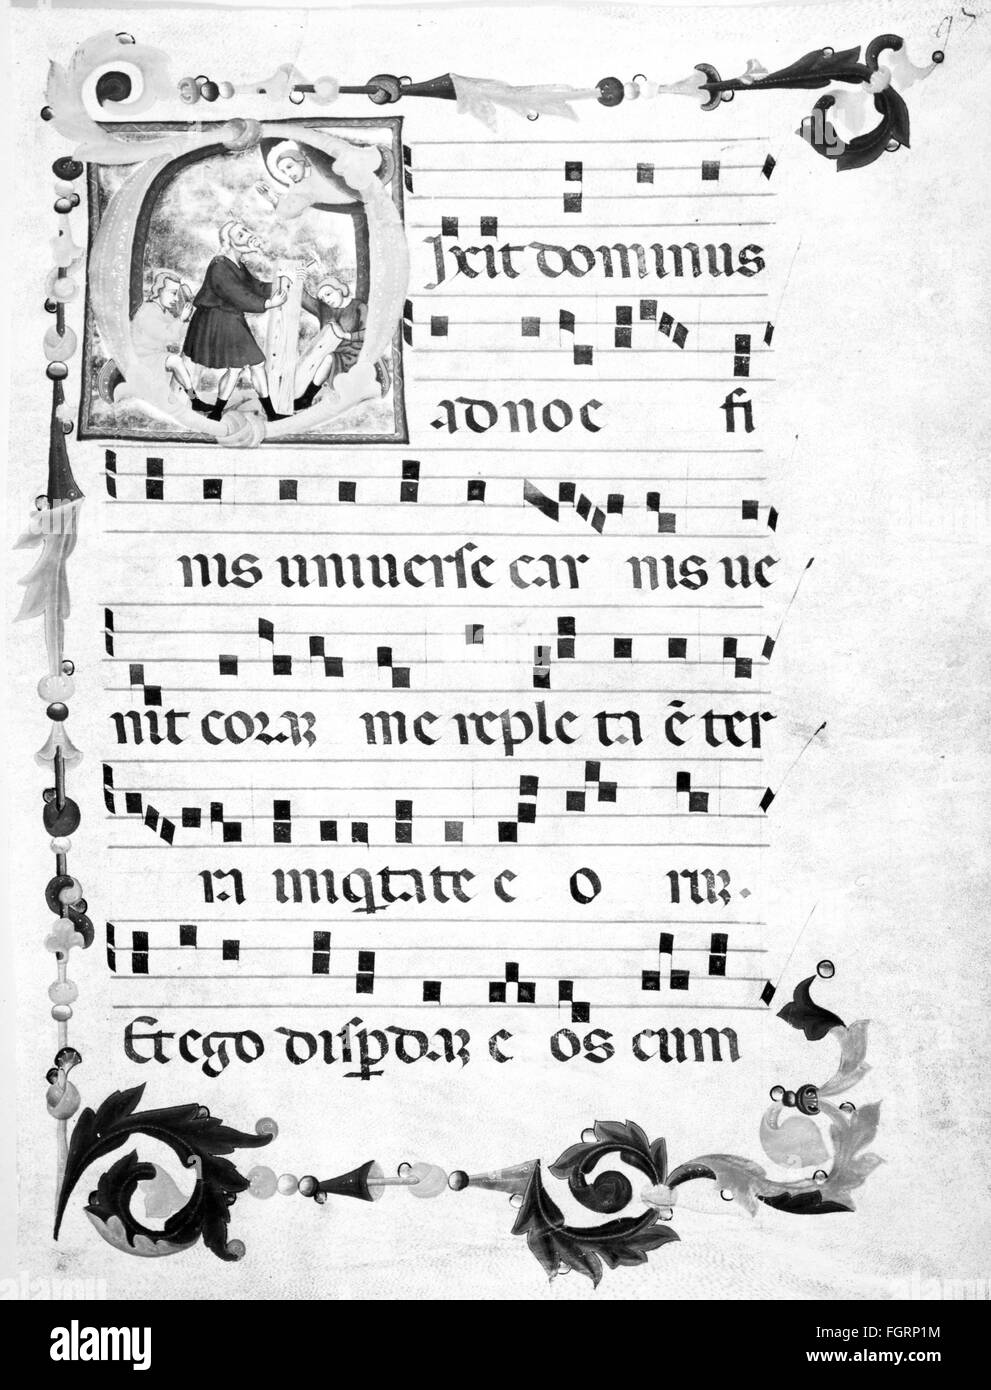 music, notation, neume, page from a Psalter, Italy, mid, 14th century, Germanisches Nationalmuseum (National Museum of Germanic History), Nuremberg, sheet of music, sheet music, notations, notation, stave, neume, psaltery, psaltry, liturgic book, sacred music, sacral music, religion, religions, Christianity, script, scripts, in Latin, Latin, Middle Ages, people, northeast, alphabetic letter O, notes, note, page, pages, historic, historical, Additional-Rights-Clearences-Not Available Stock Photo